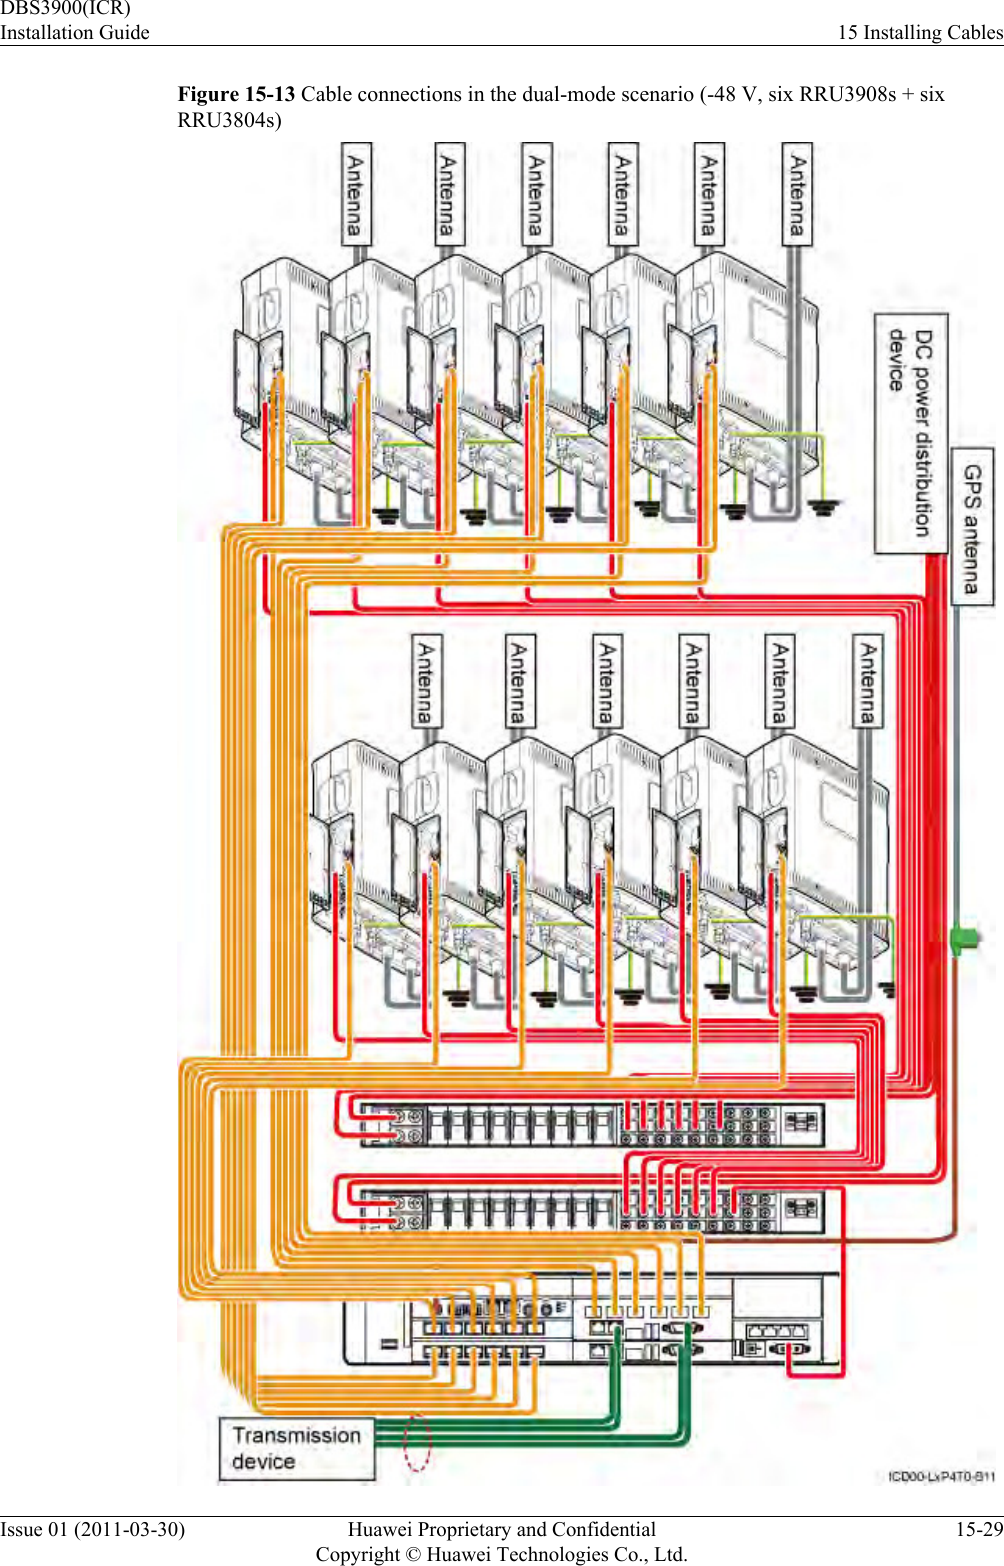 Figure 15-13 Cable connections in the dual-mode scenario (-48 V, six RRU3908s + sixRRU3804s)DBS3900(ICR)Installation Guide 15 Installing CablesIssue 01 (2011-03-30) Huawei Proprietary and ConfidentialCopyright © Huawei Technologies Co., Ltd.15-29